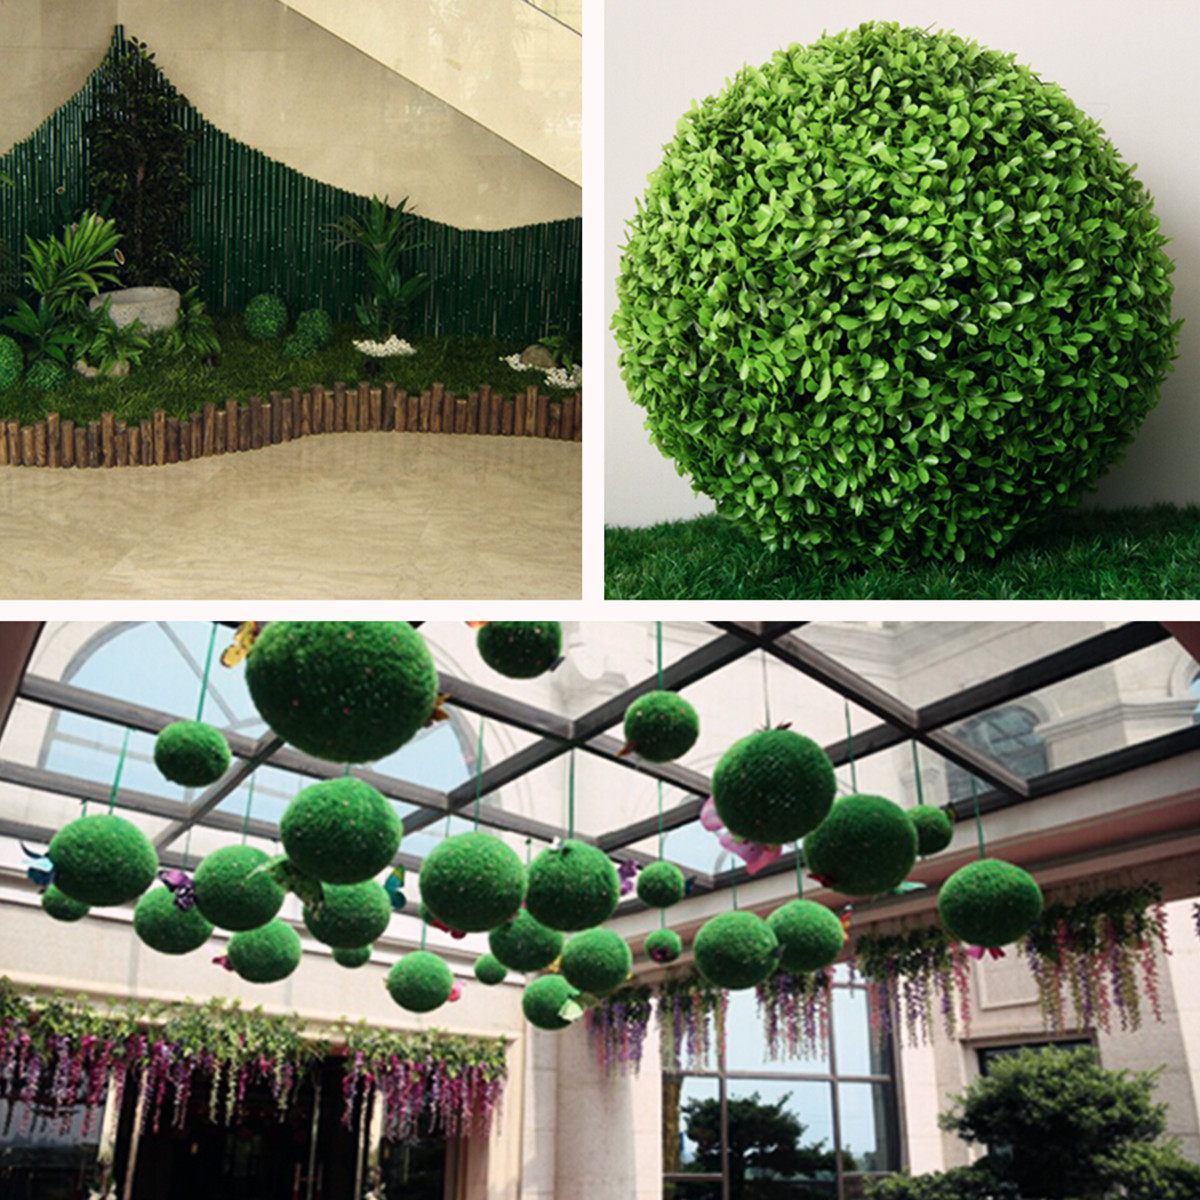 35cm-Plastic-Artificial-Topiary-Grass-Ball-Leaf-Effect-Ball-Wedding-Gardening-Hanging-Decoration-1036994-3